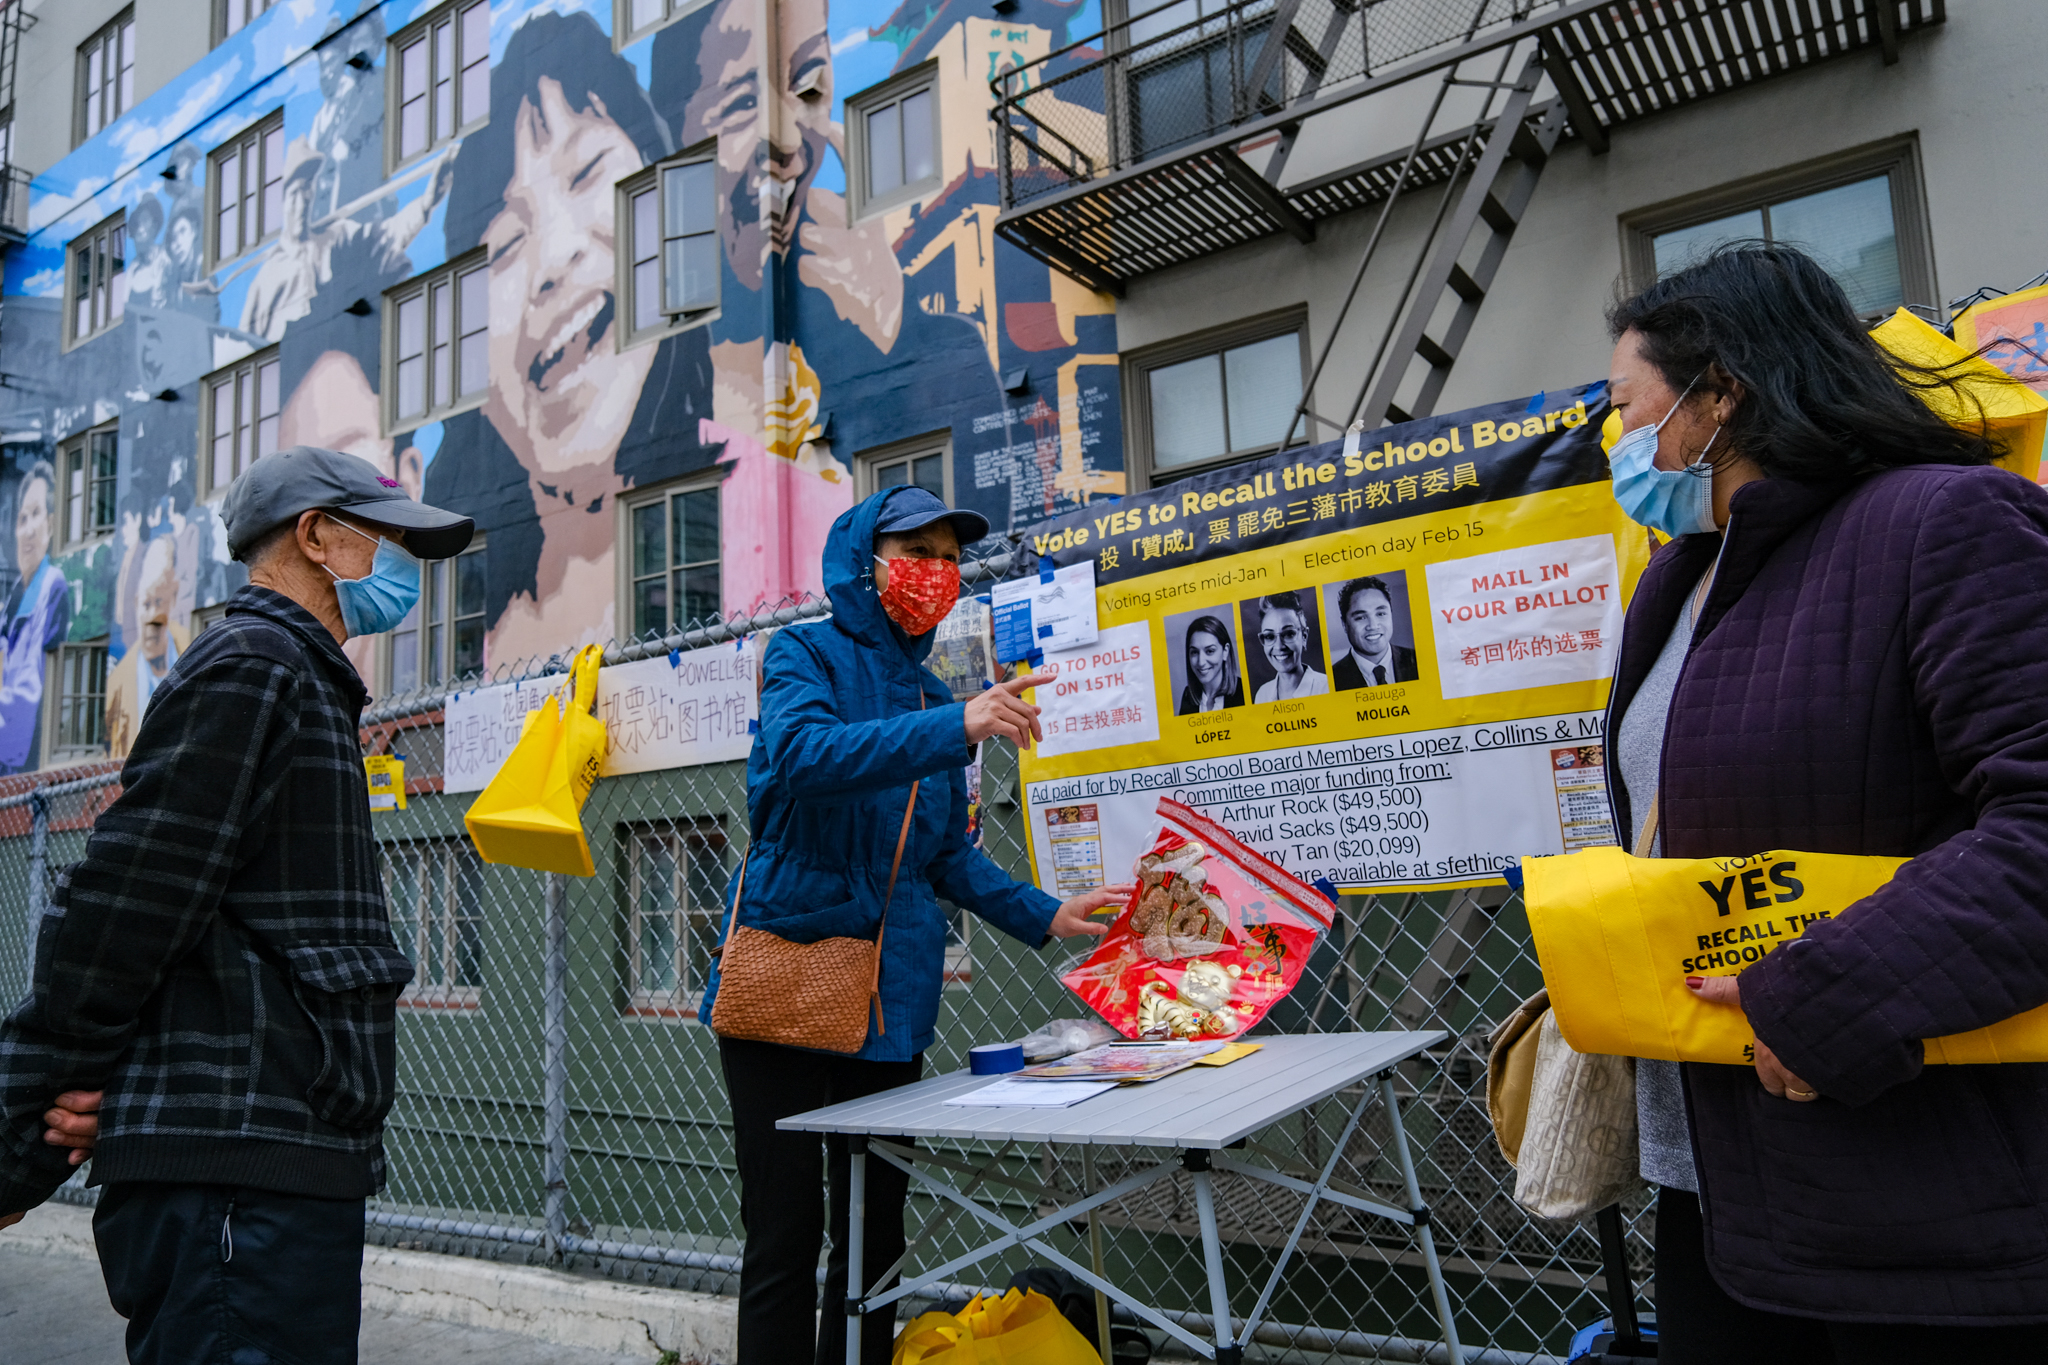 Did Asian Voter Turnout Play a Decisive Role in the SF School Board Recall? Maybe Not